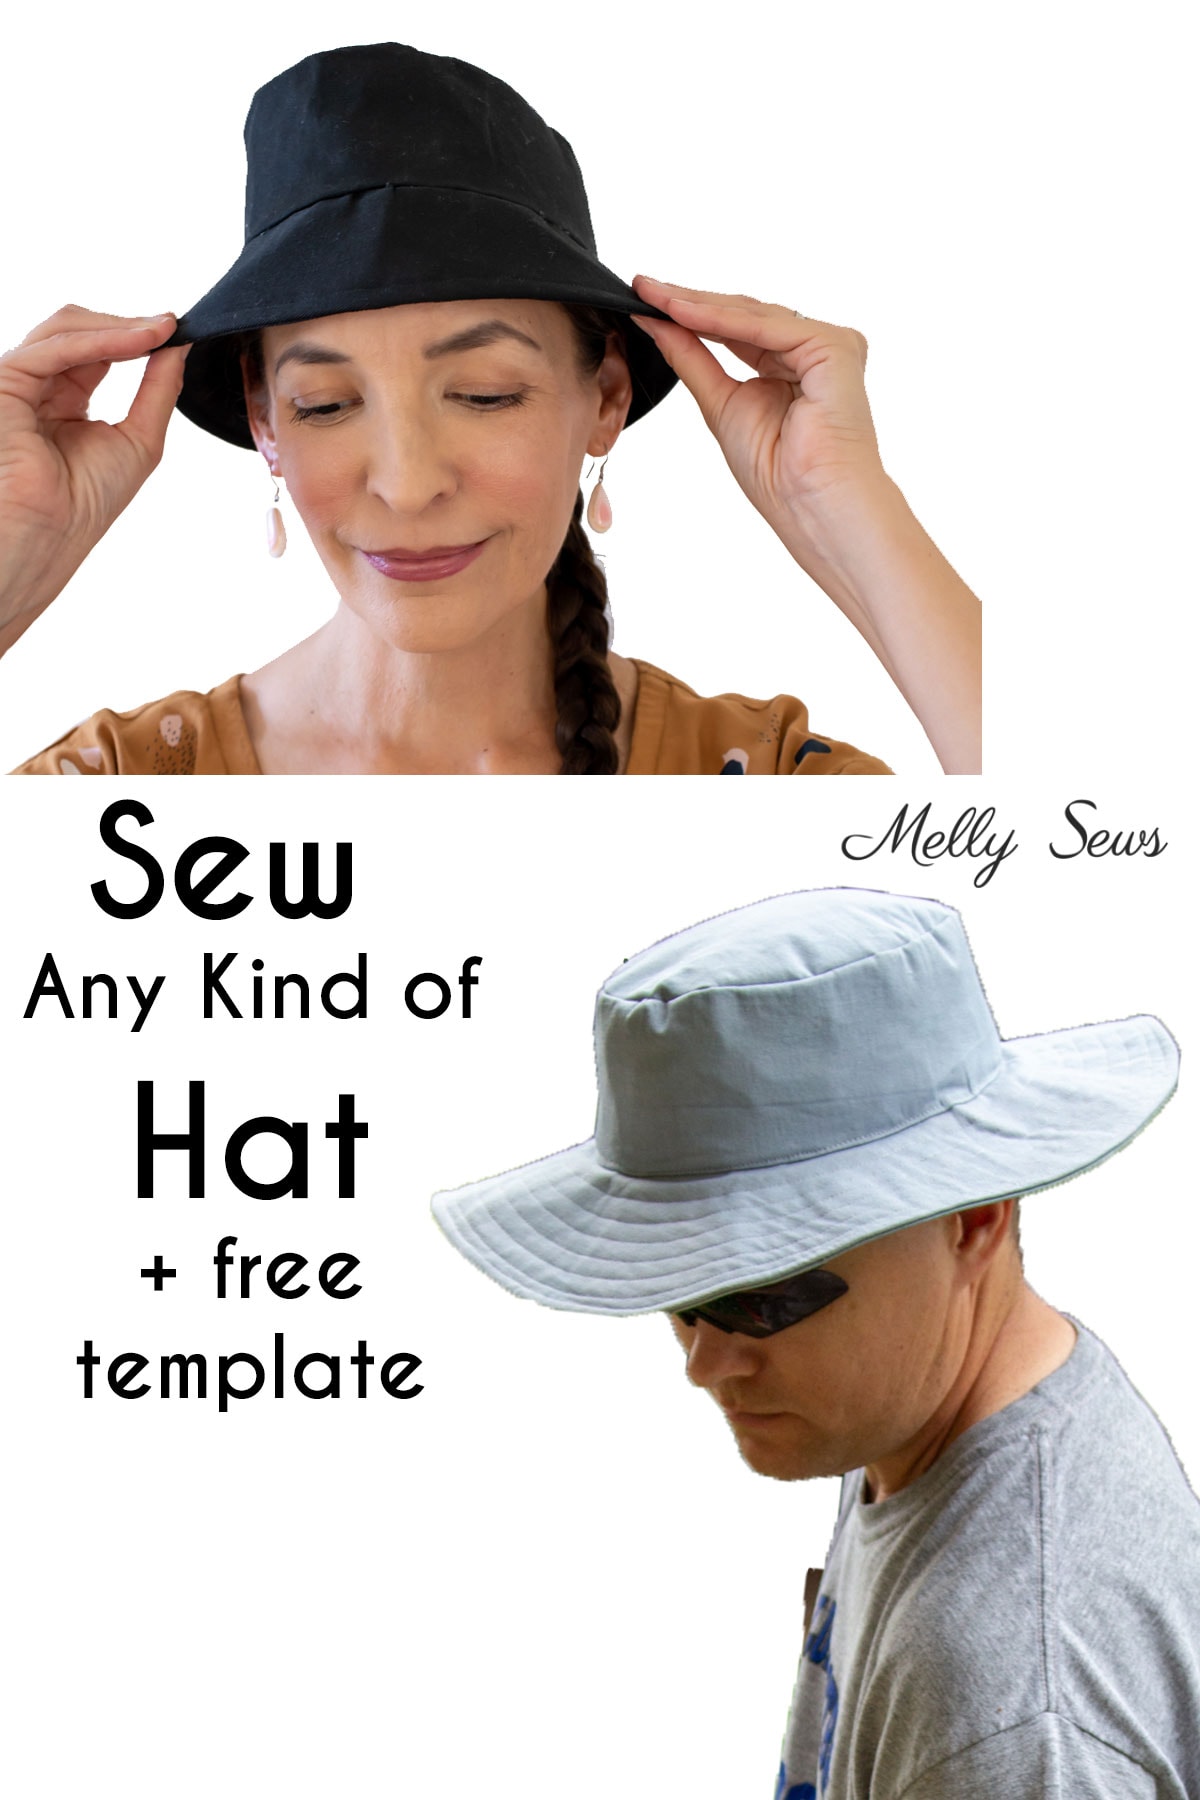 19 Bucket hat ideas  outfits with hats, bucket hat, bucket hat outfit